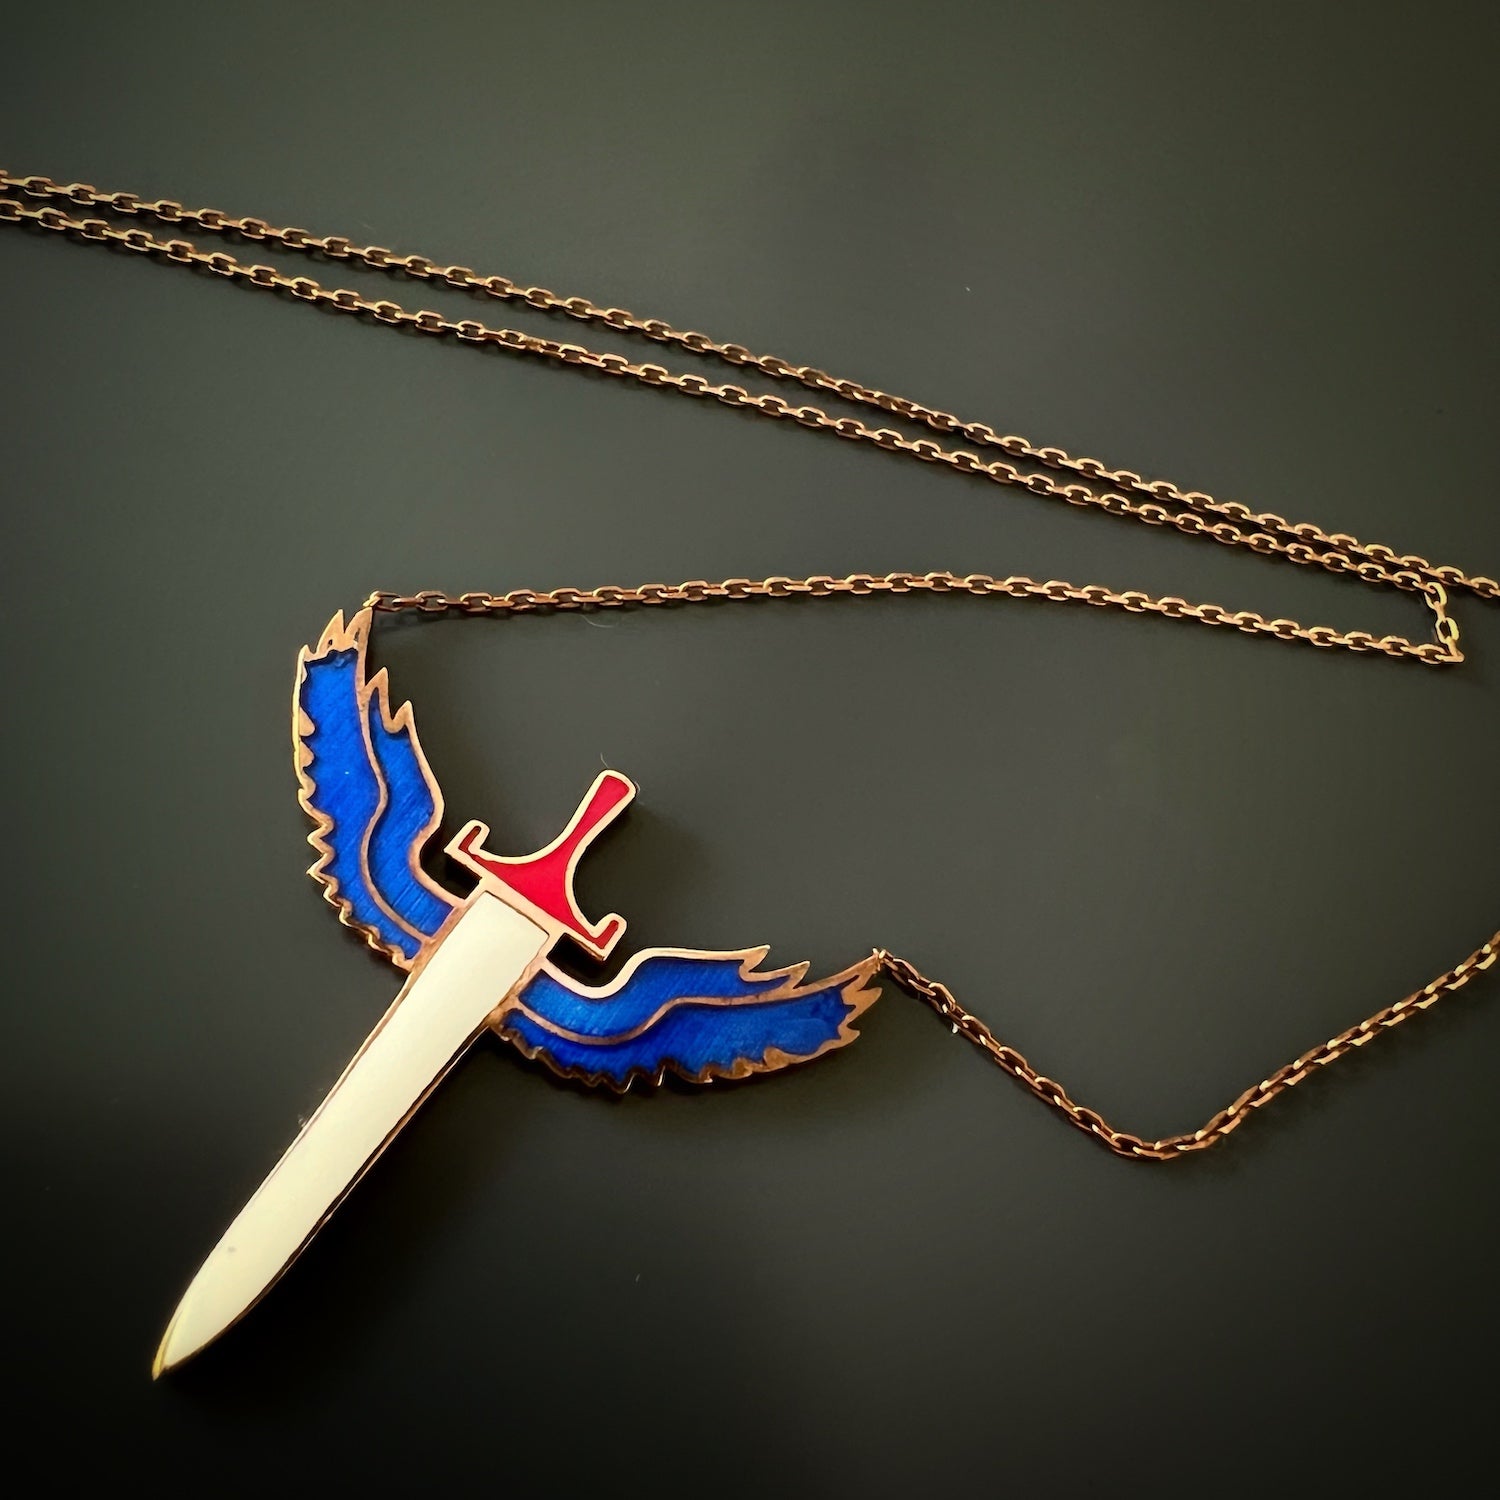 The Angel Sword Necklace is a perfect gift for those seeking guidance and protection